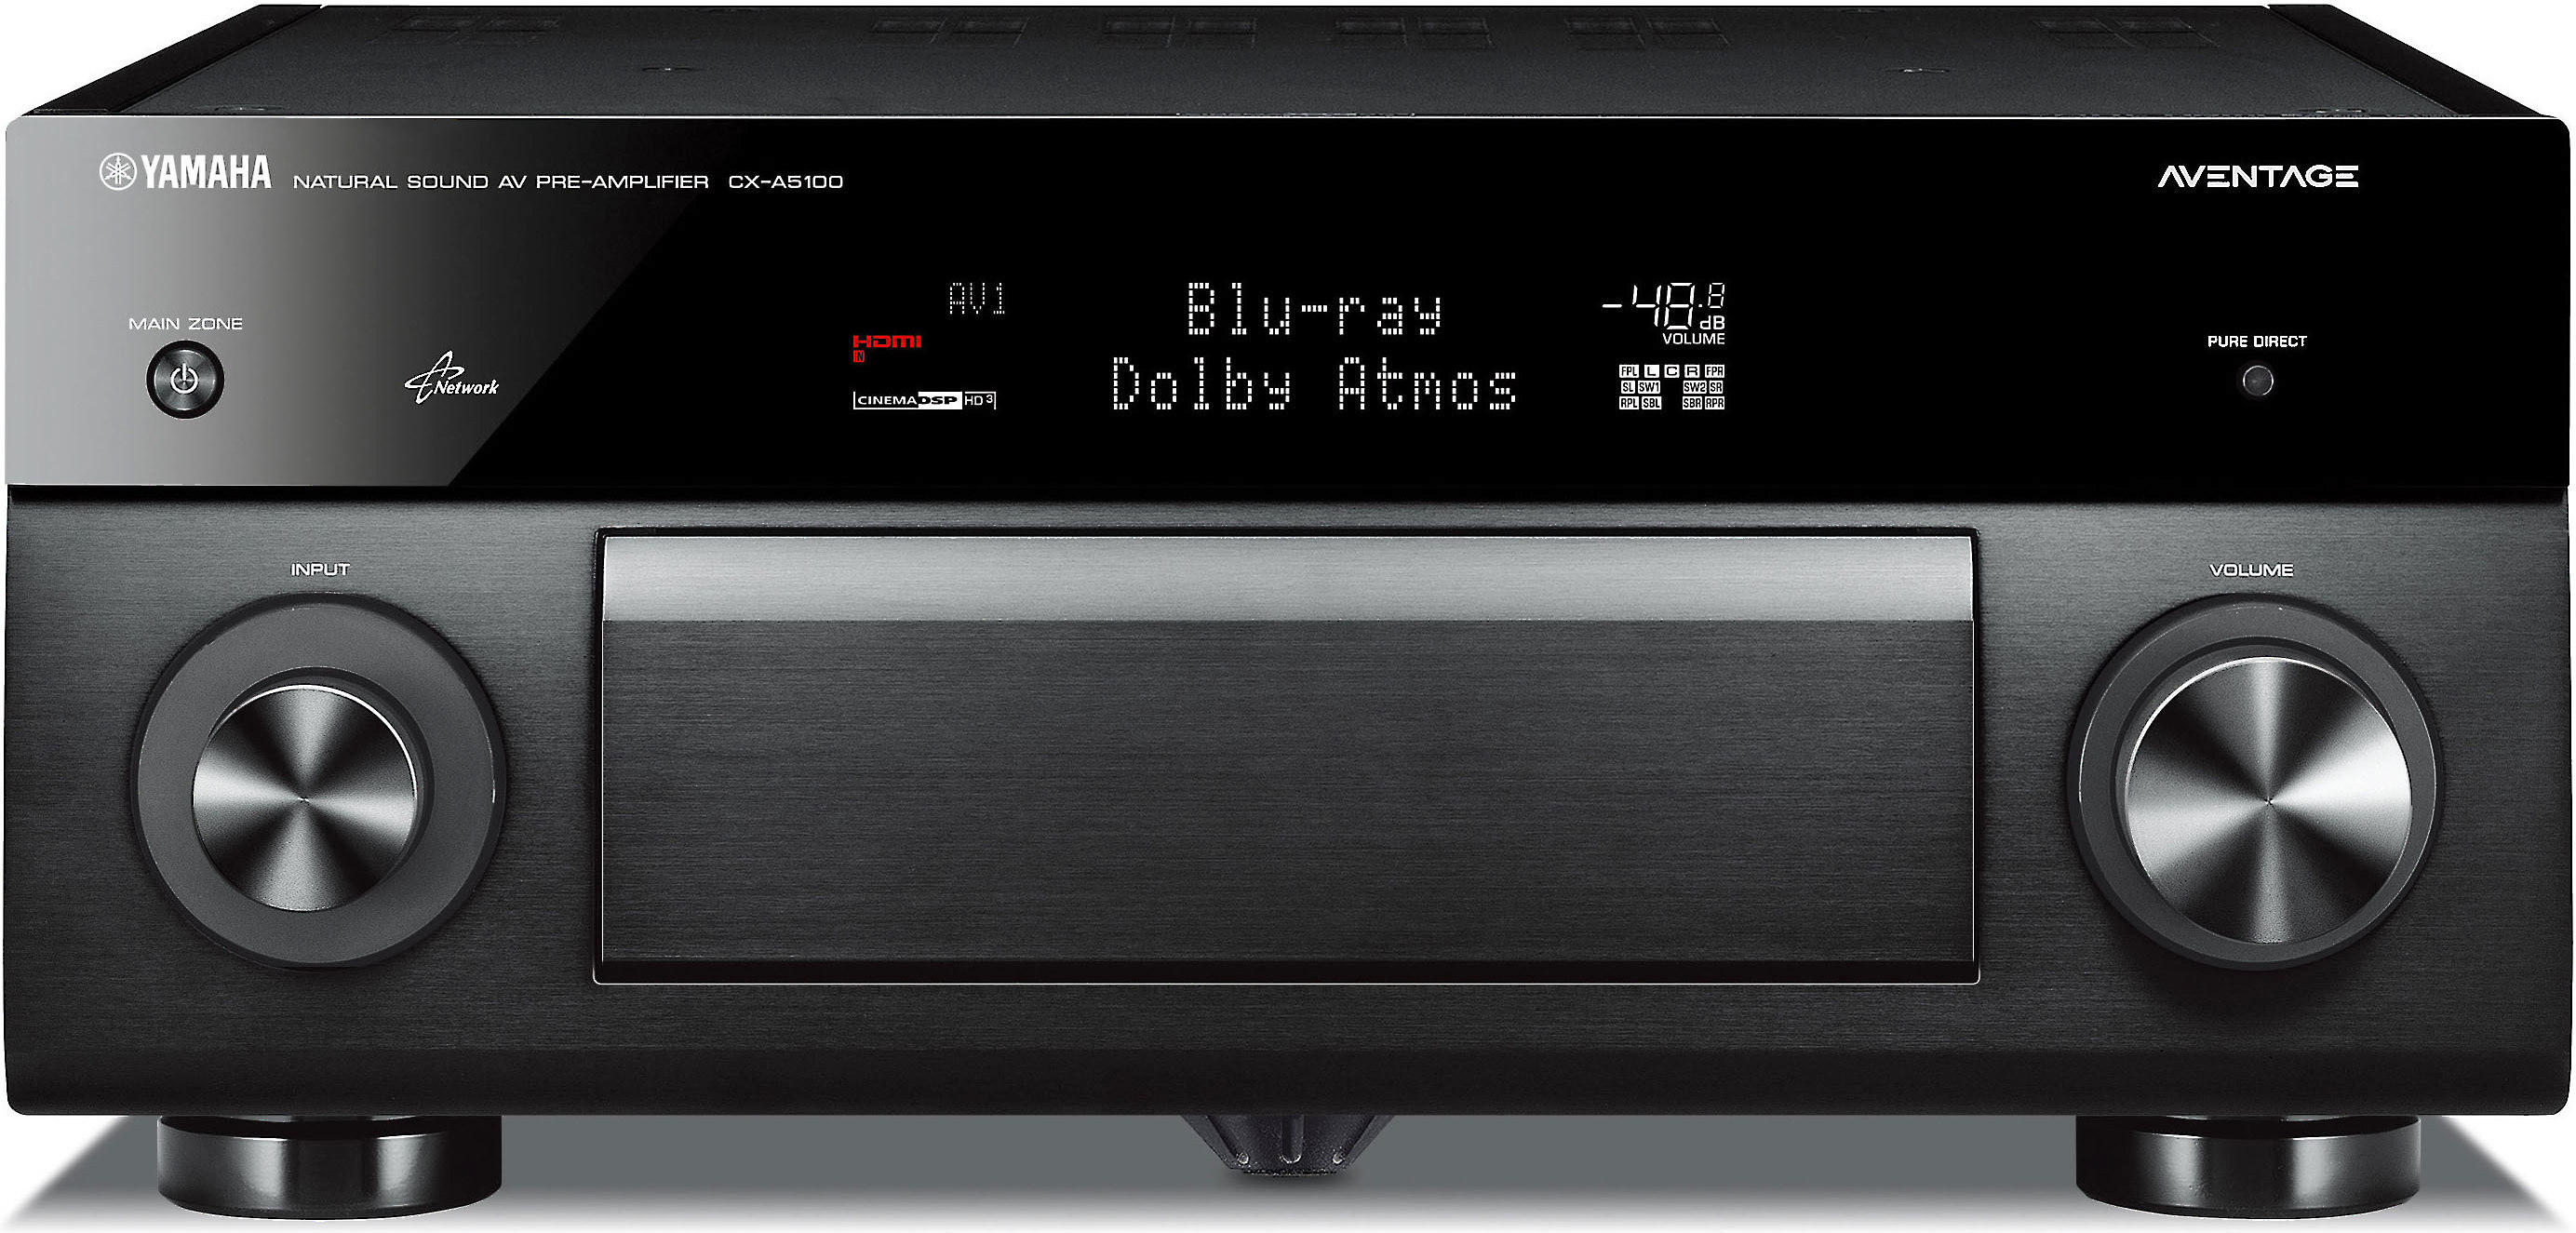 Customer Reviews: Yamaha CX-A5100 Home theater preamp